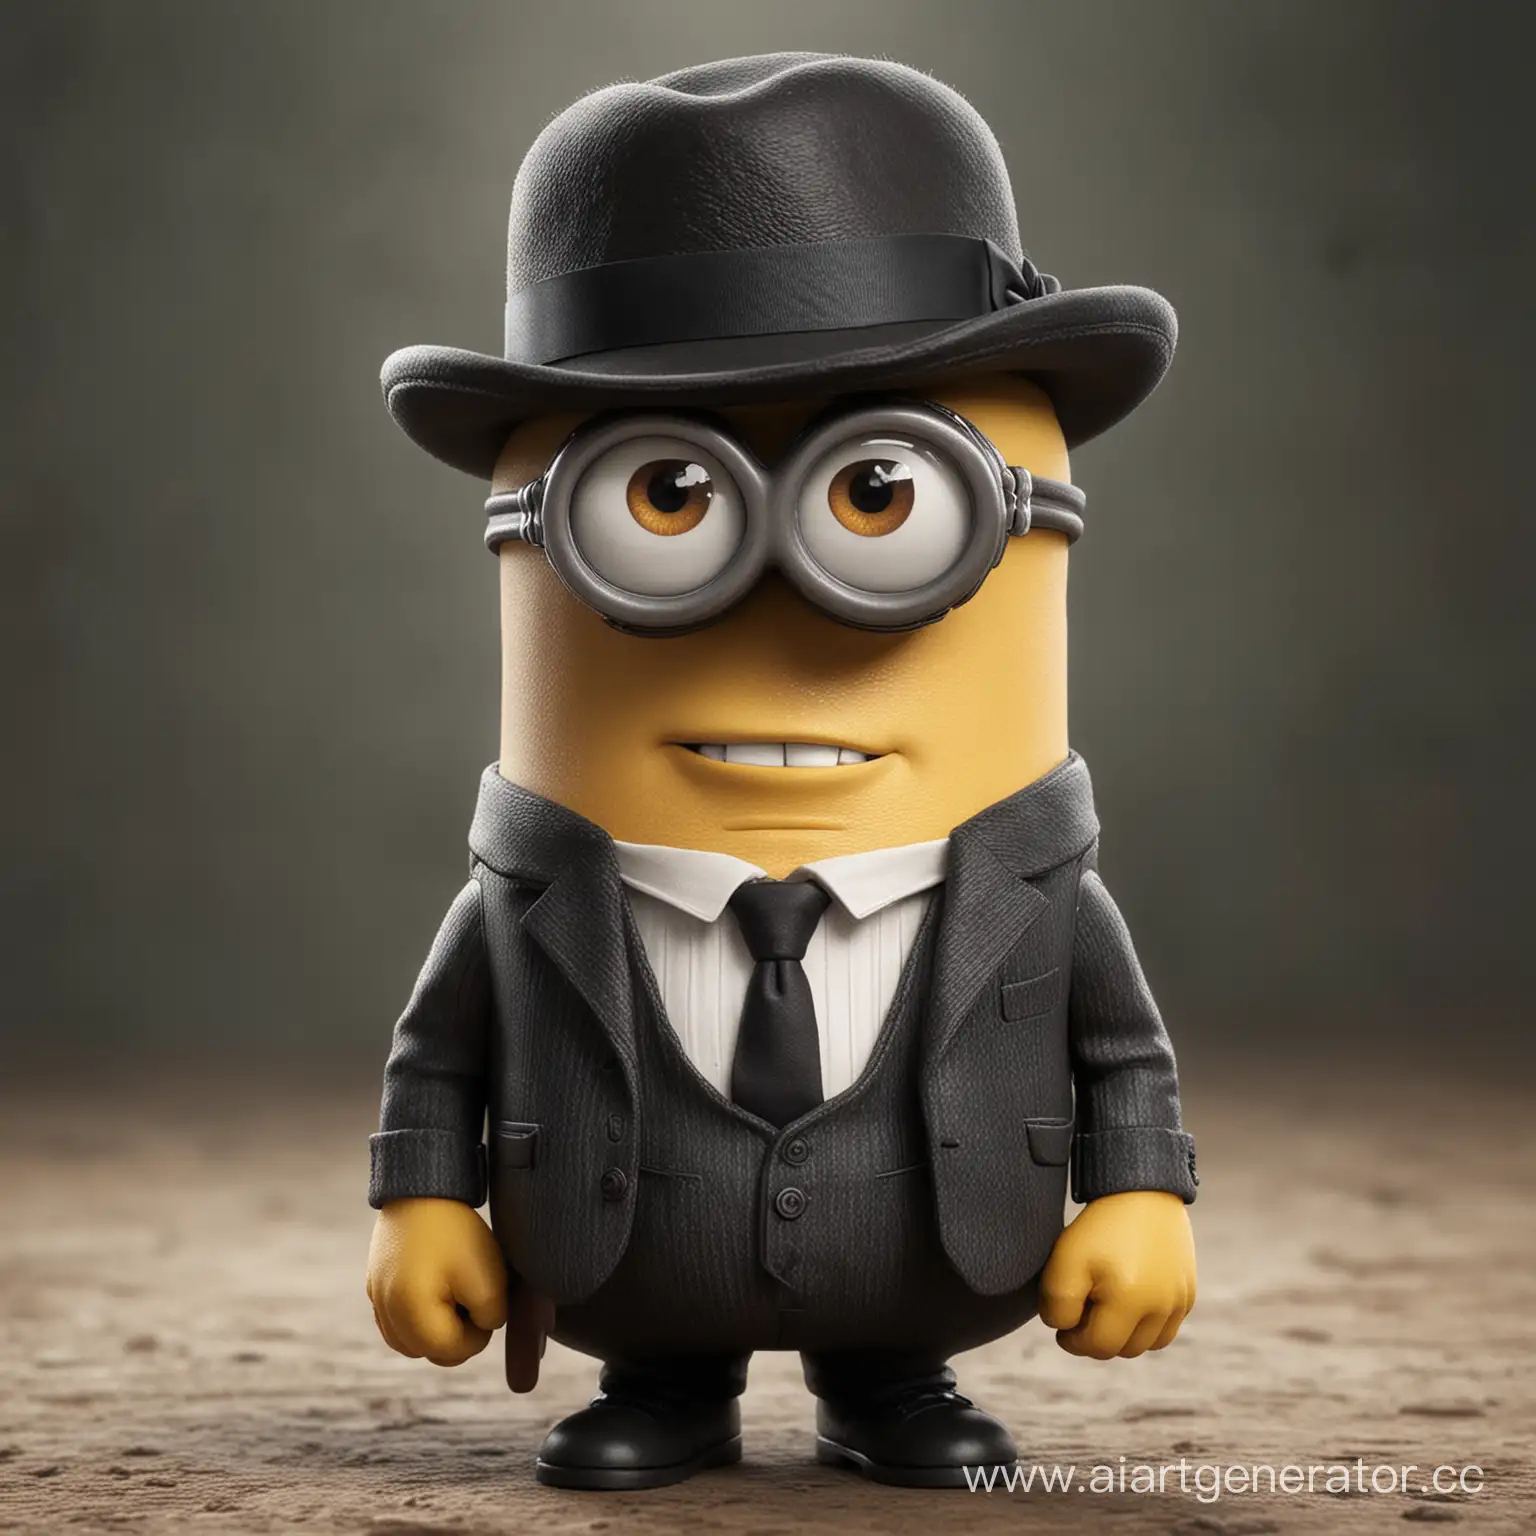 Minion-Thomas-Shelby-Playful-Minion-Dressed-as-Thomas-Shelby-from-Peaky-Blinders